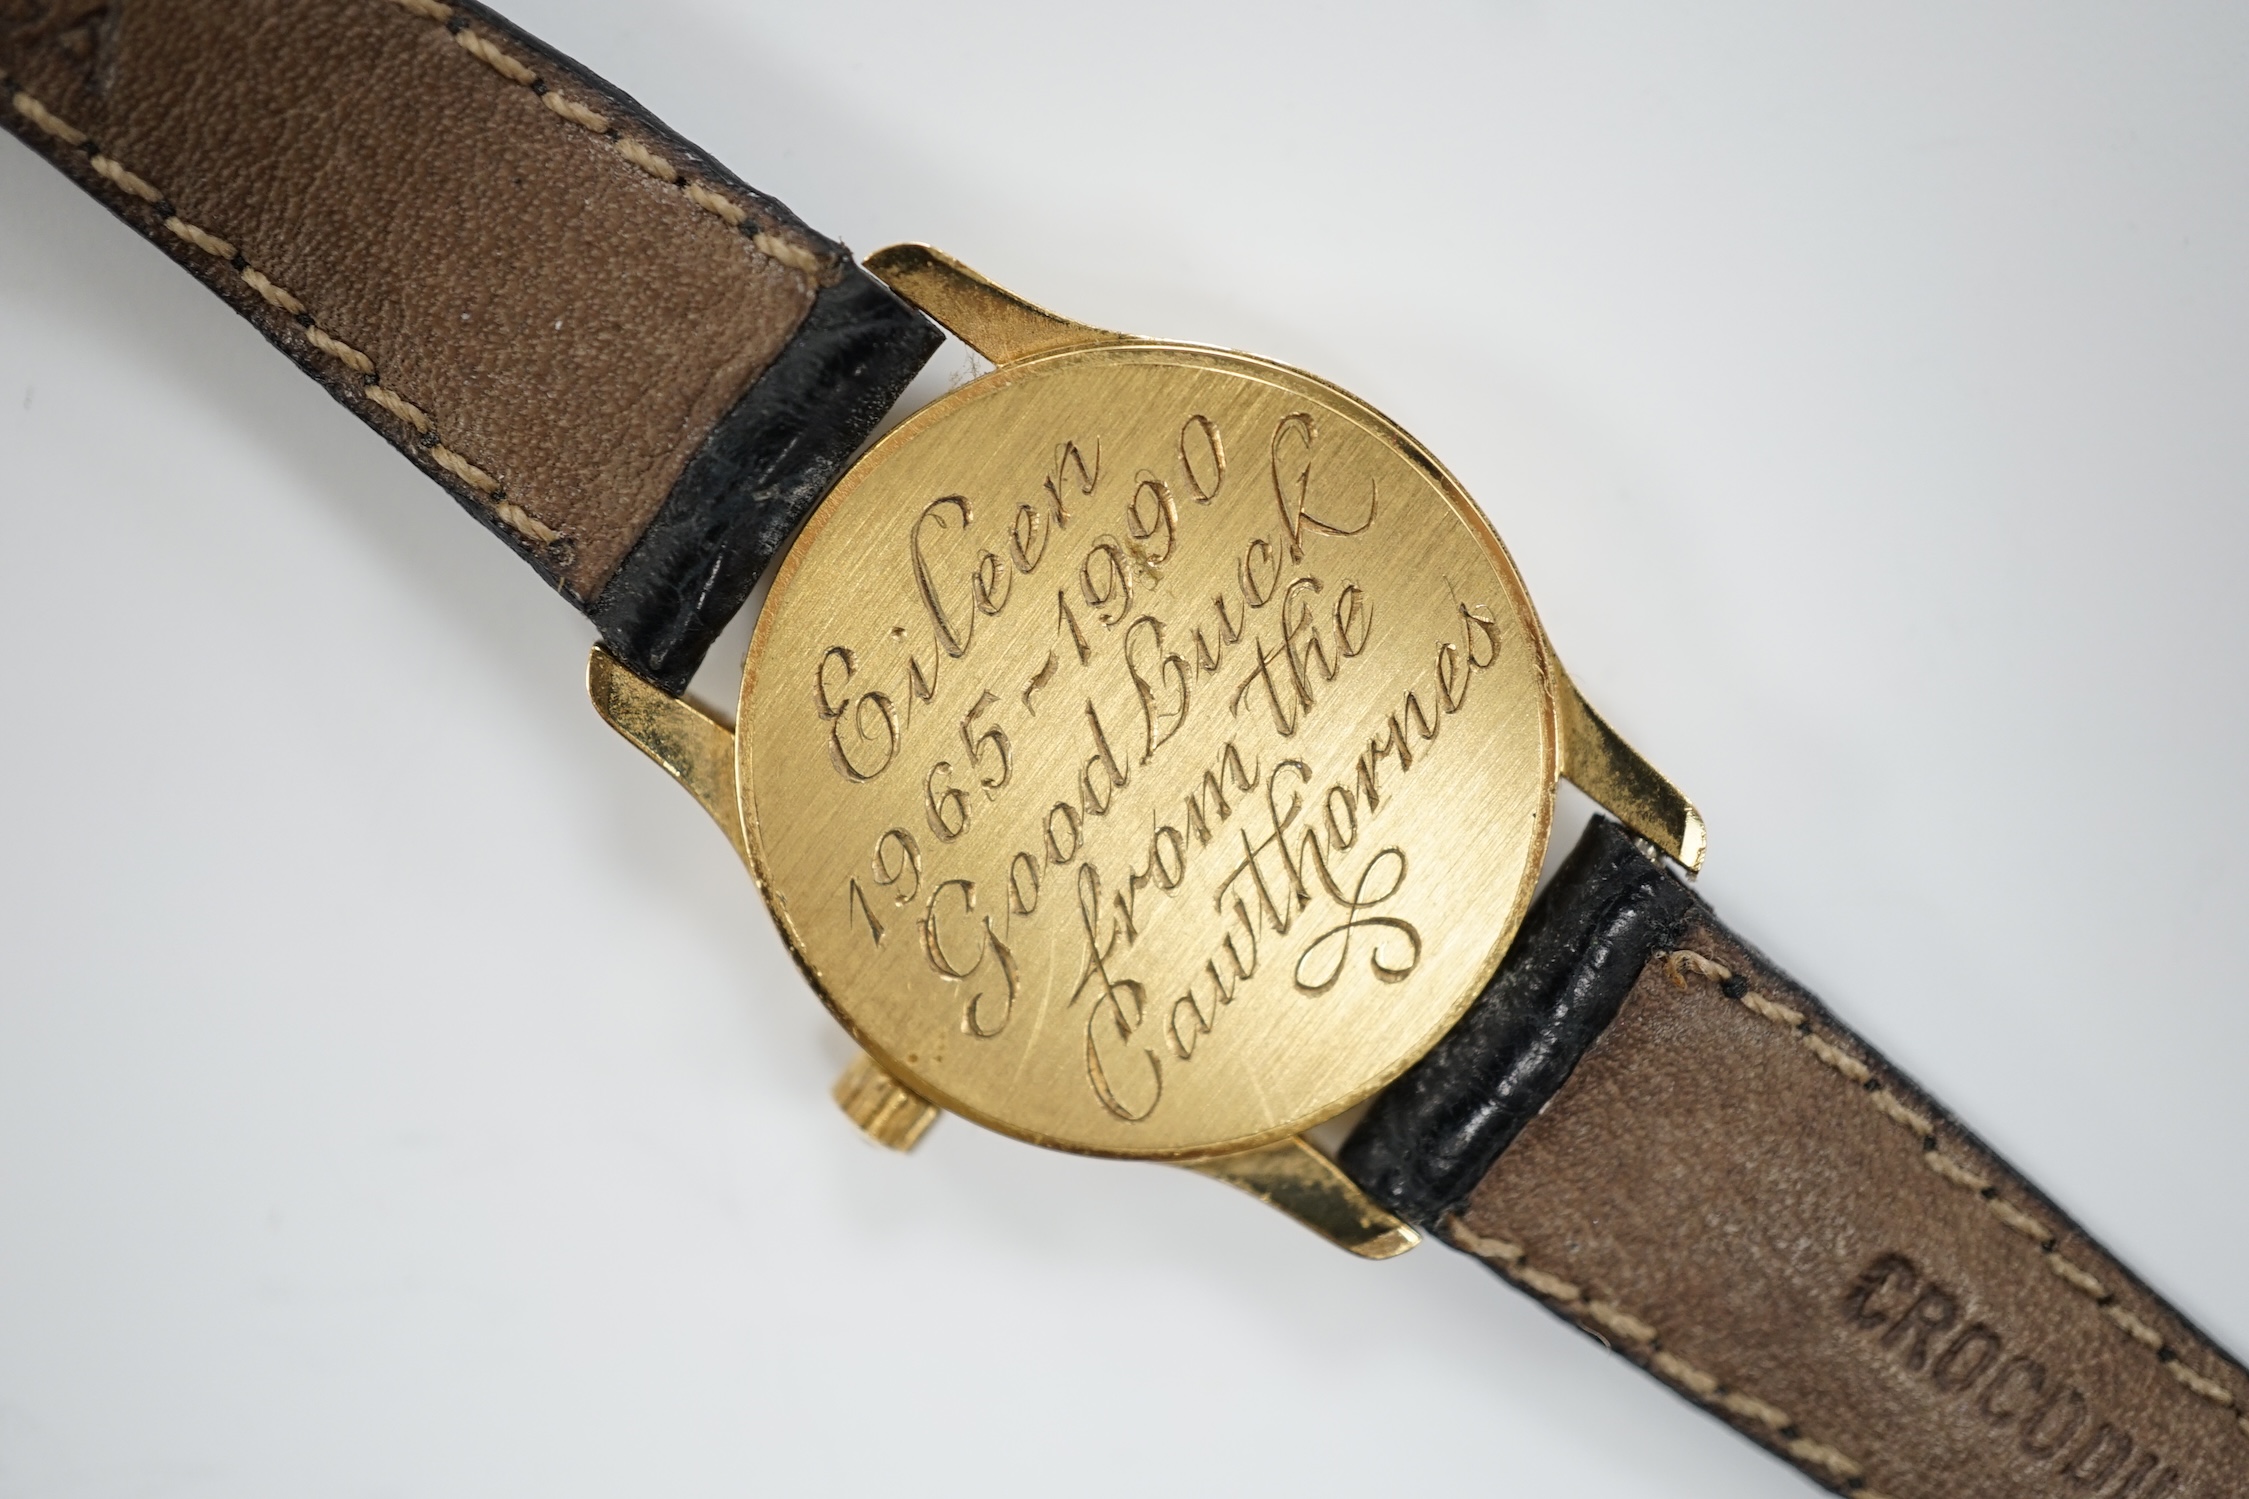 A lady's 9ct gold Omega quartz wrist watch, with case back inscription, on a leather strap with Omega buckle, with Omega box.